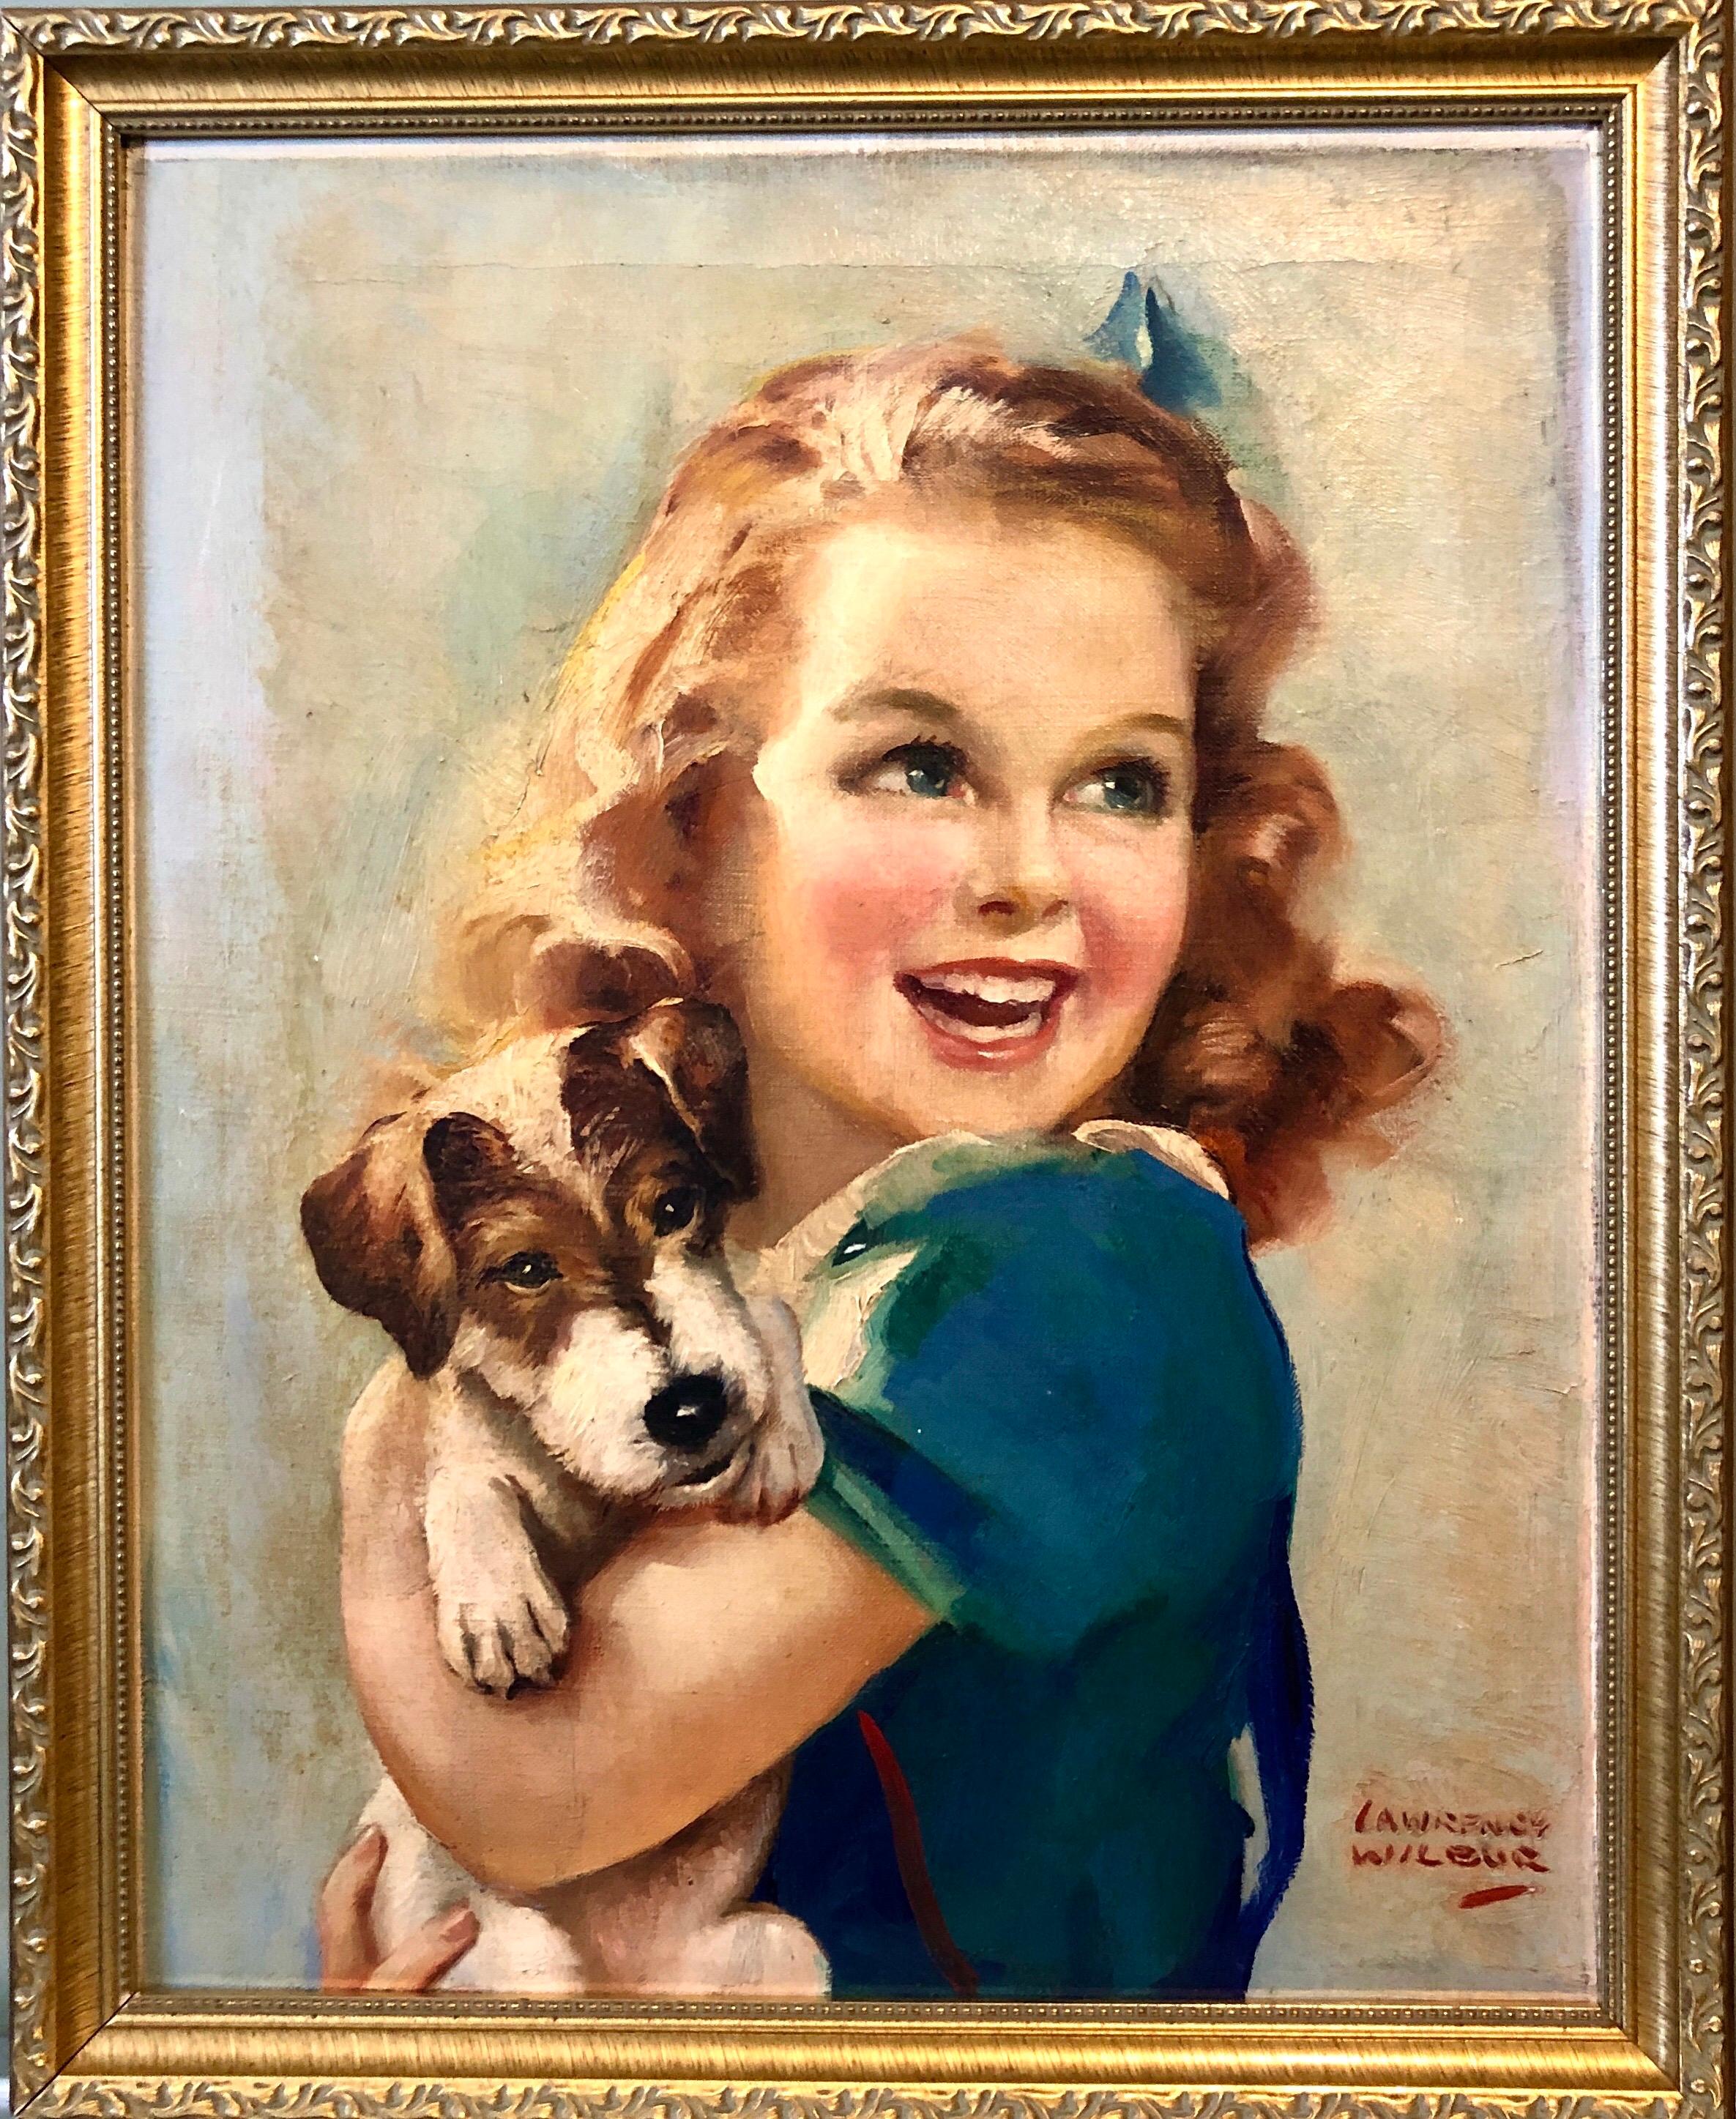 1930s Vintage Oil Painting Girl, Puppy Dog, American Illustrator Lawrence Wilbur